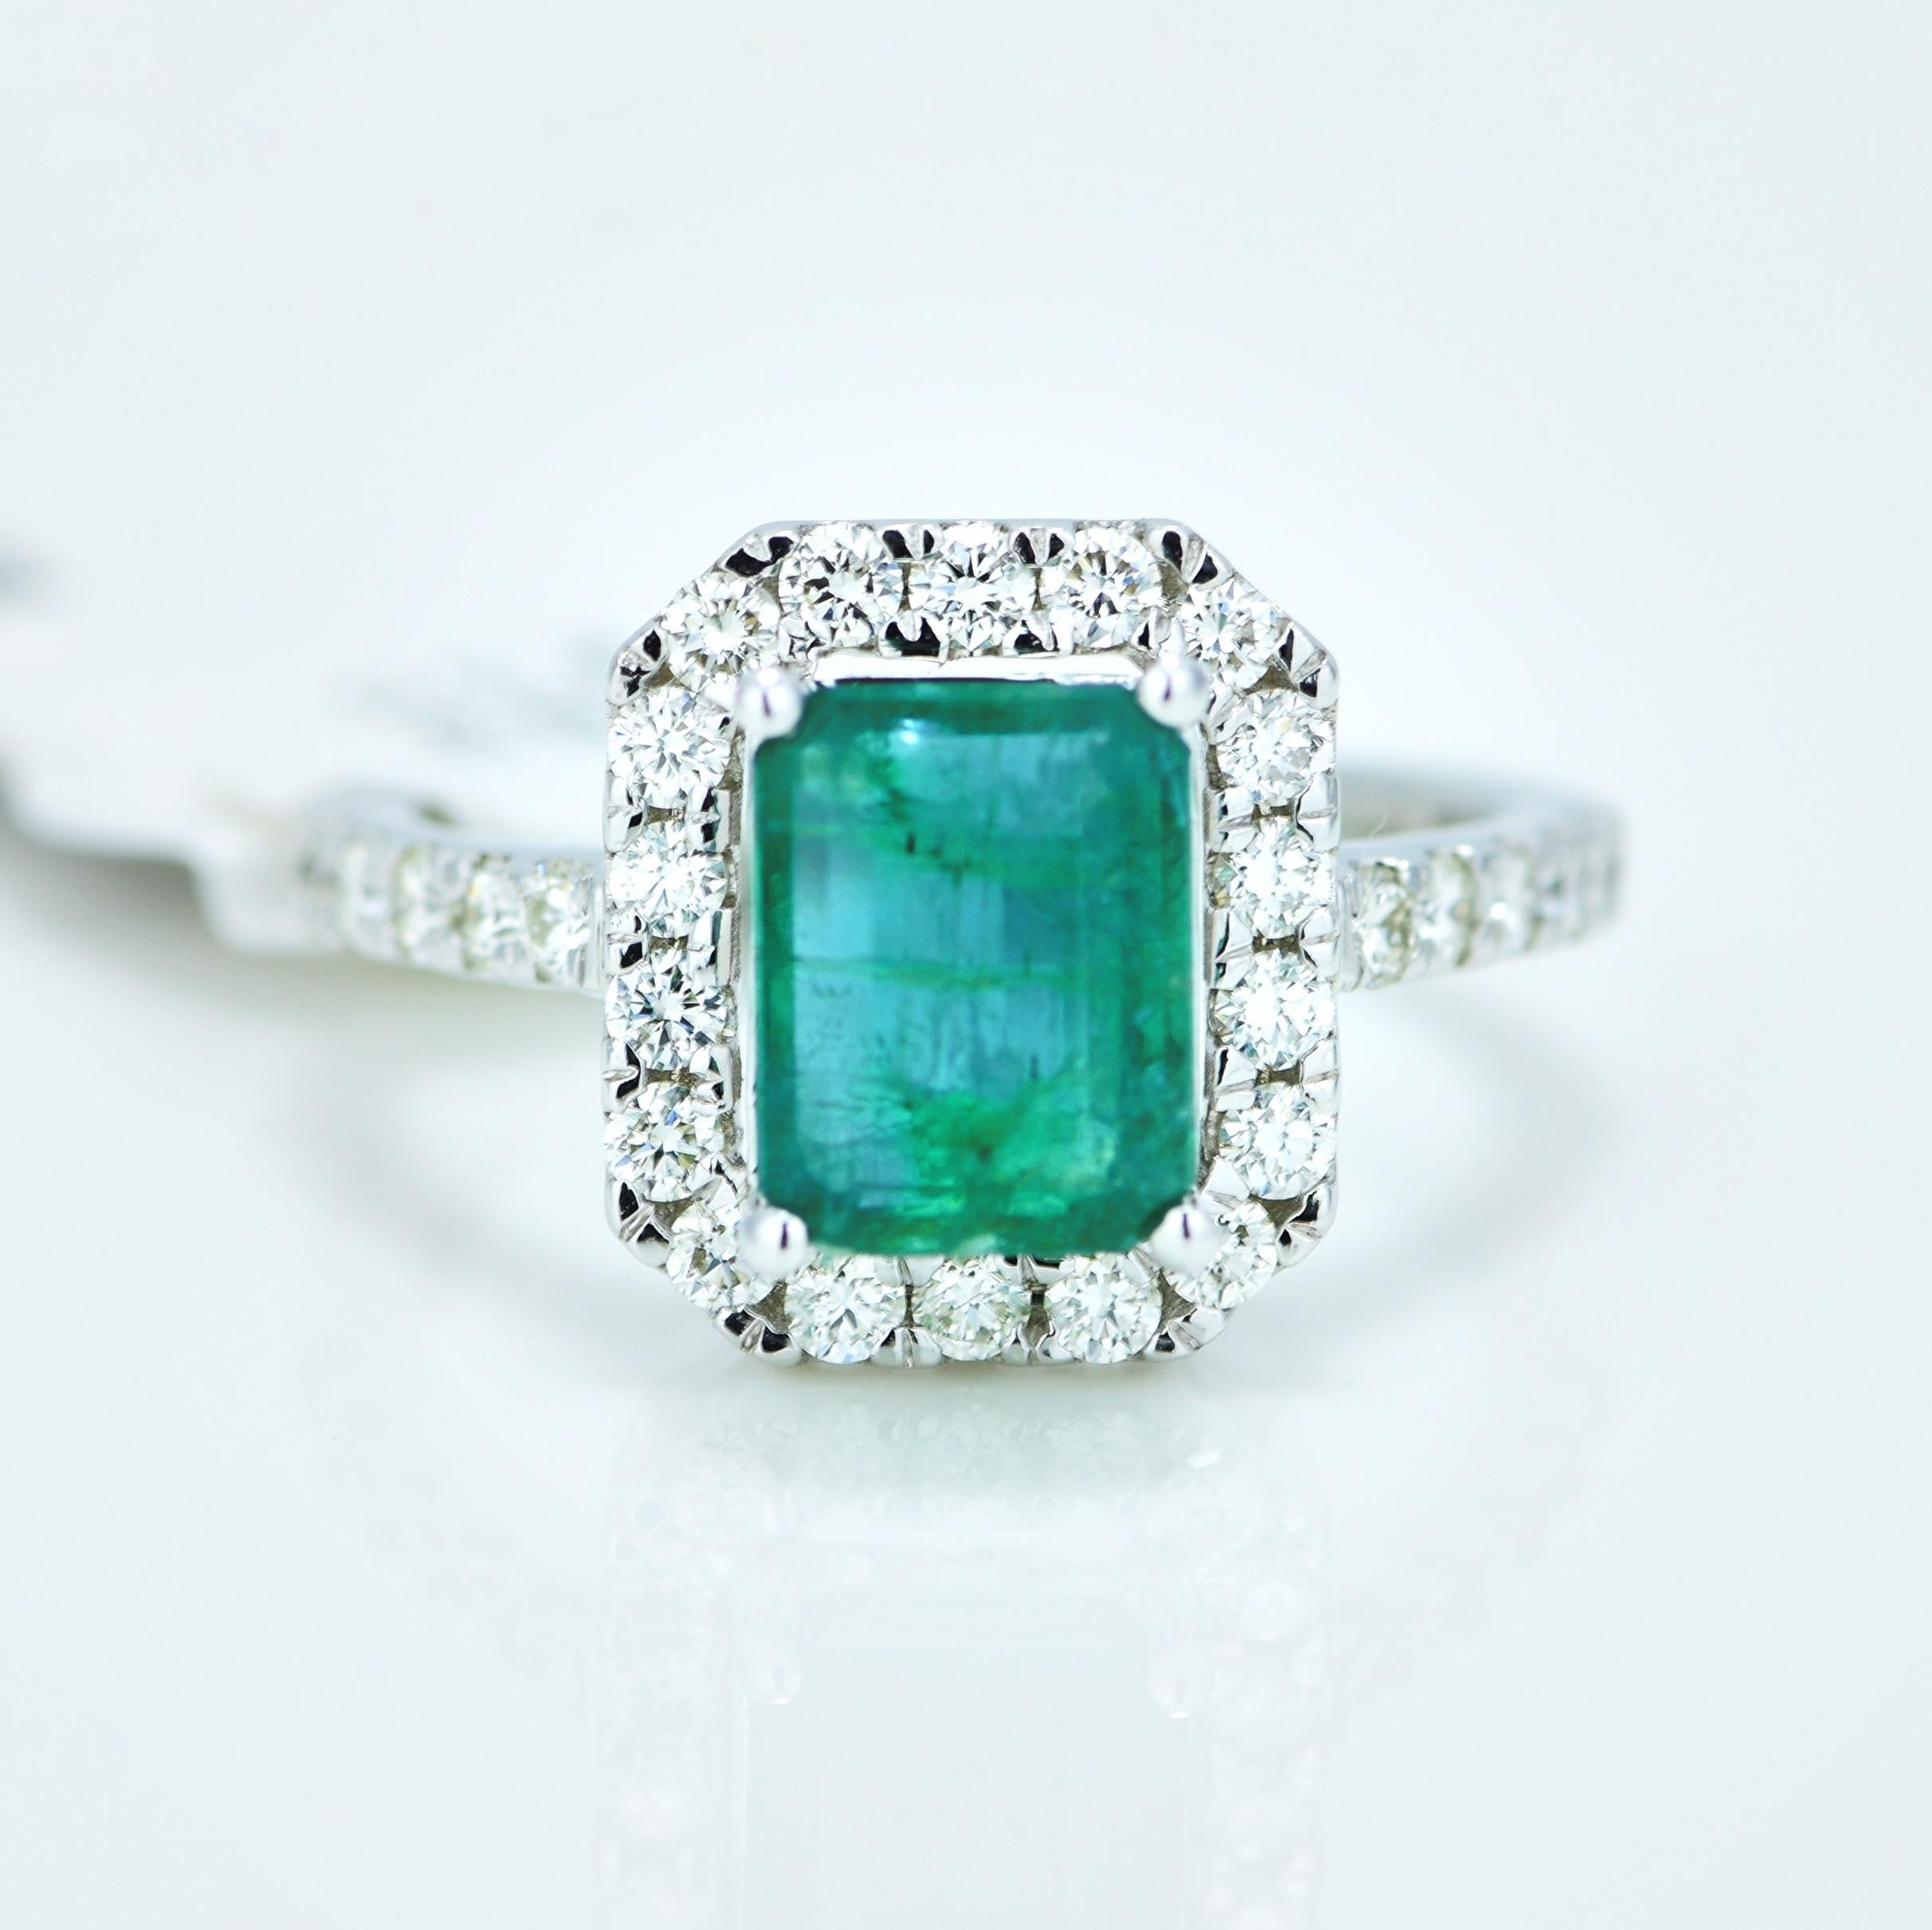 Emerald Cut Natural 2.11 Carat Green Emerald and Diamond Ring For Sale